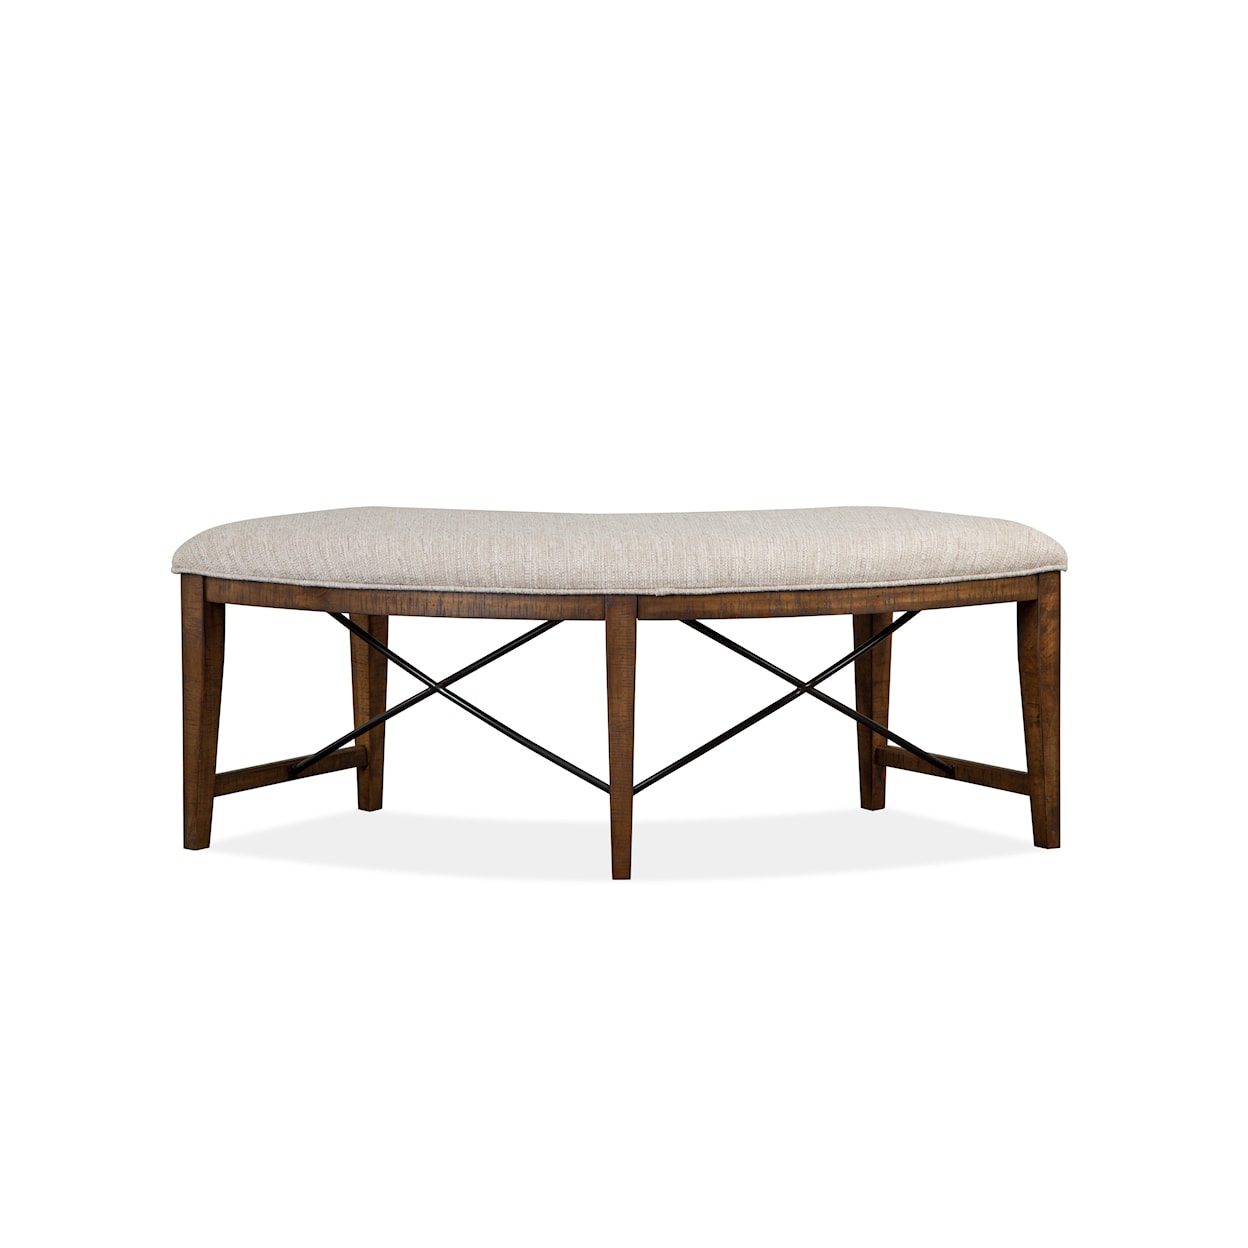 Magnussen Home Bay Creek Dining Curved Bench w/ Upholstered Seat